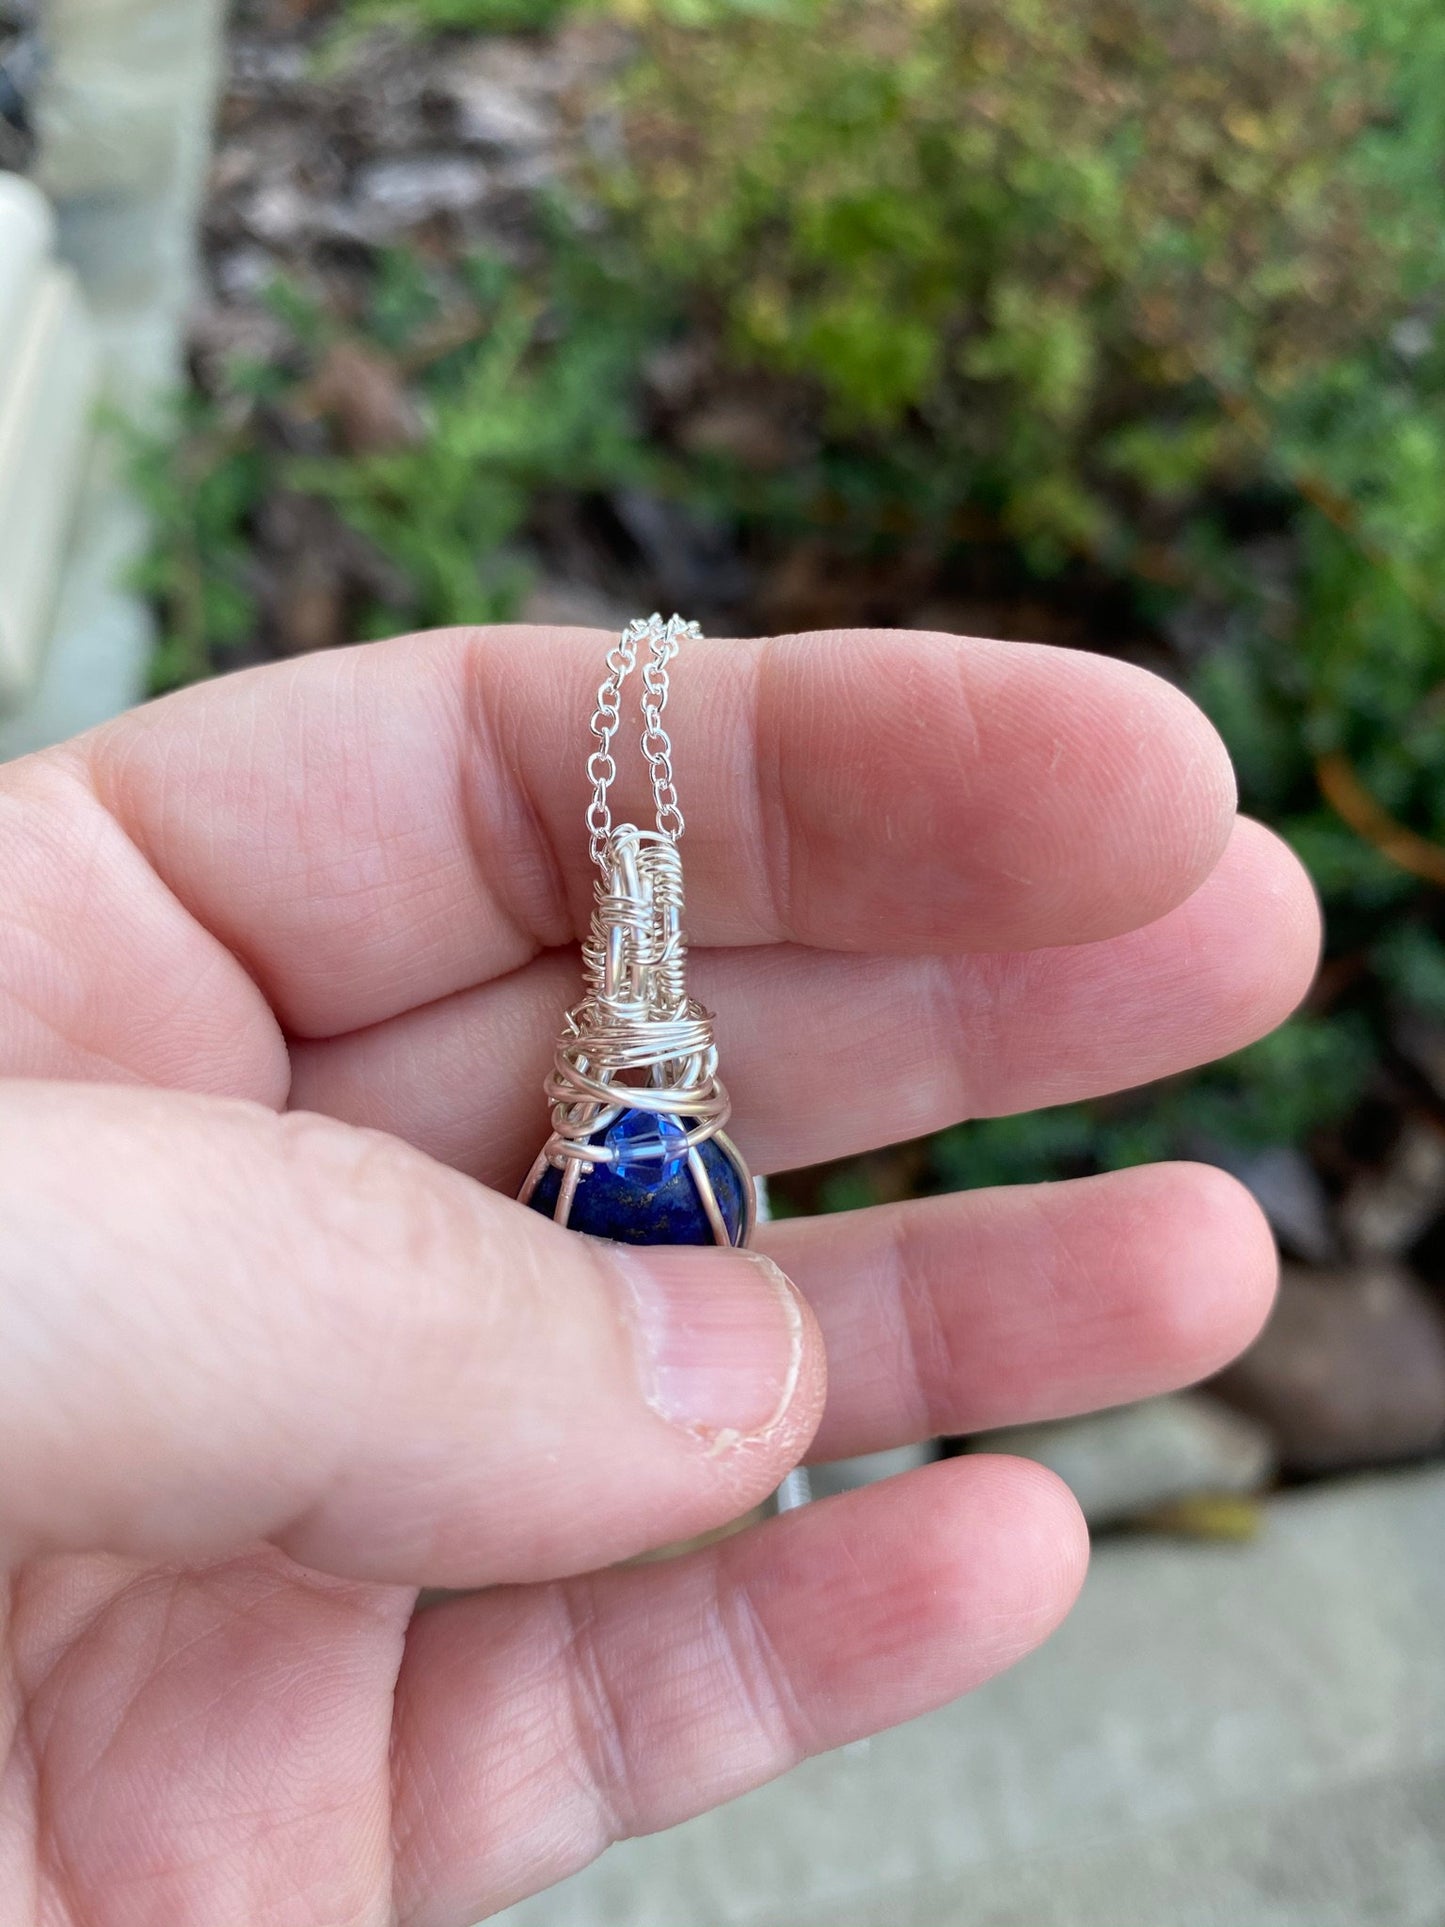 Petite Blue Agate Oval Pendant | Wire Wrapped Necklace